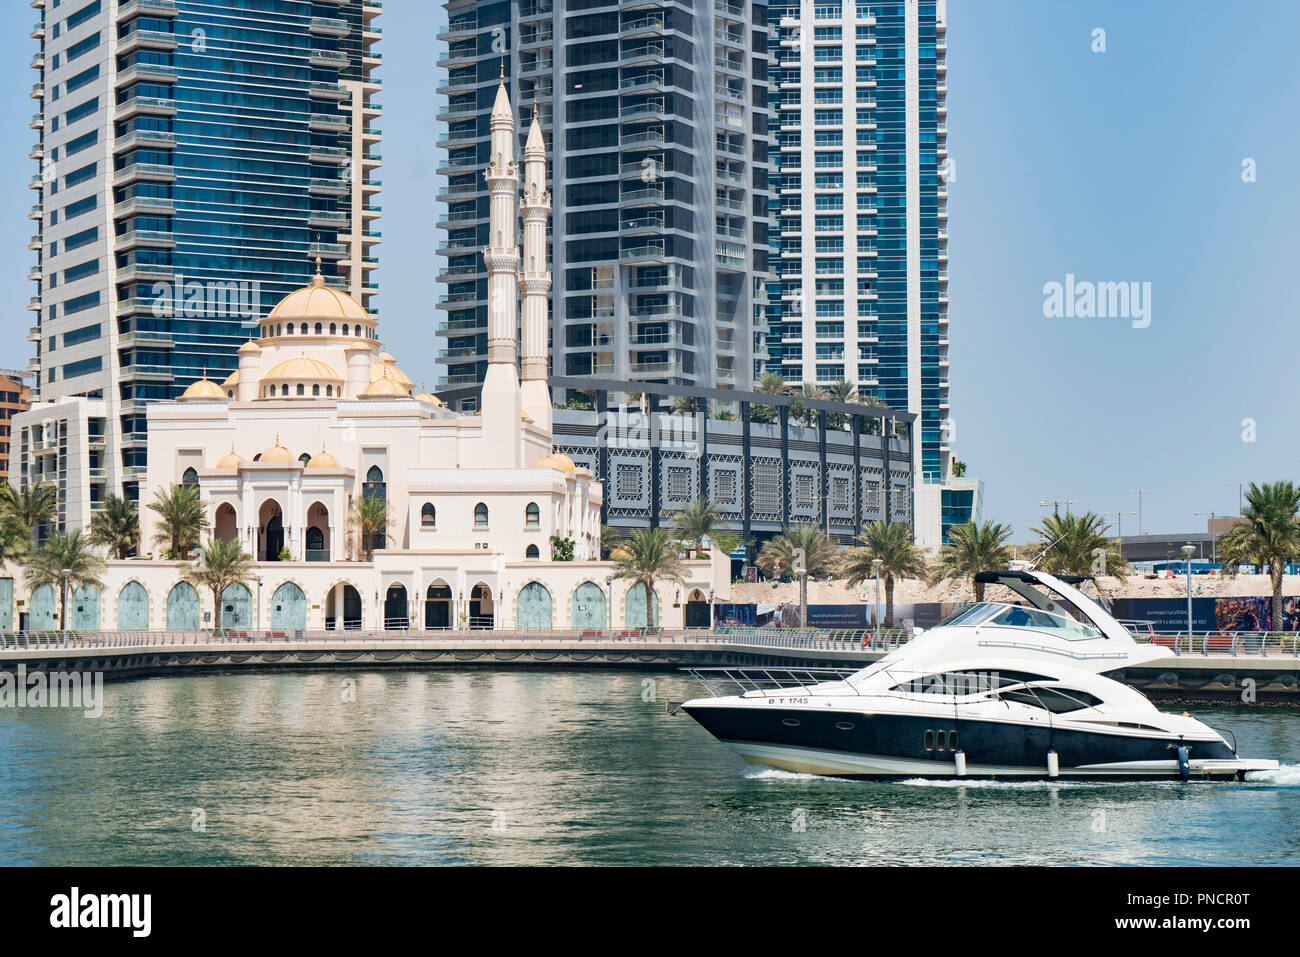 Contrast between motor boat and new mosque at Dubai Marina district in UAE Stock Photo